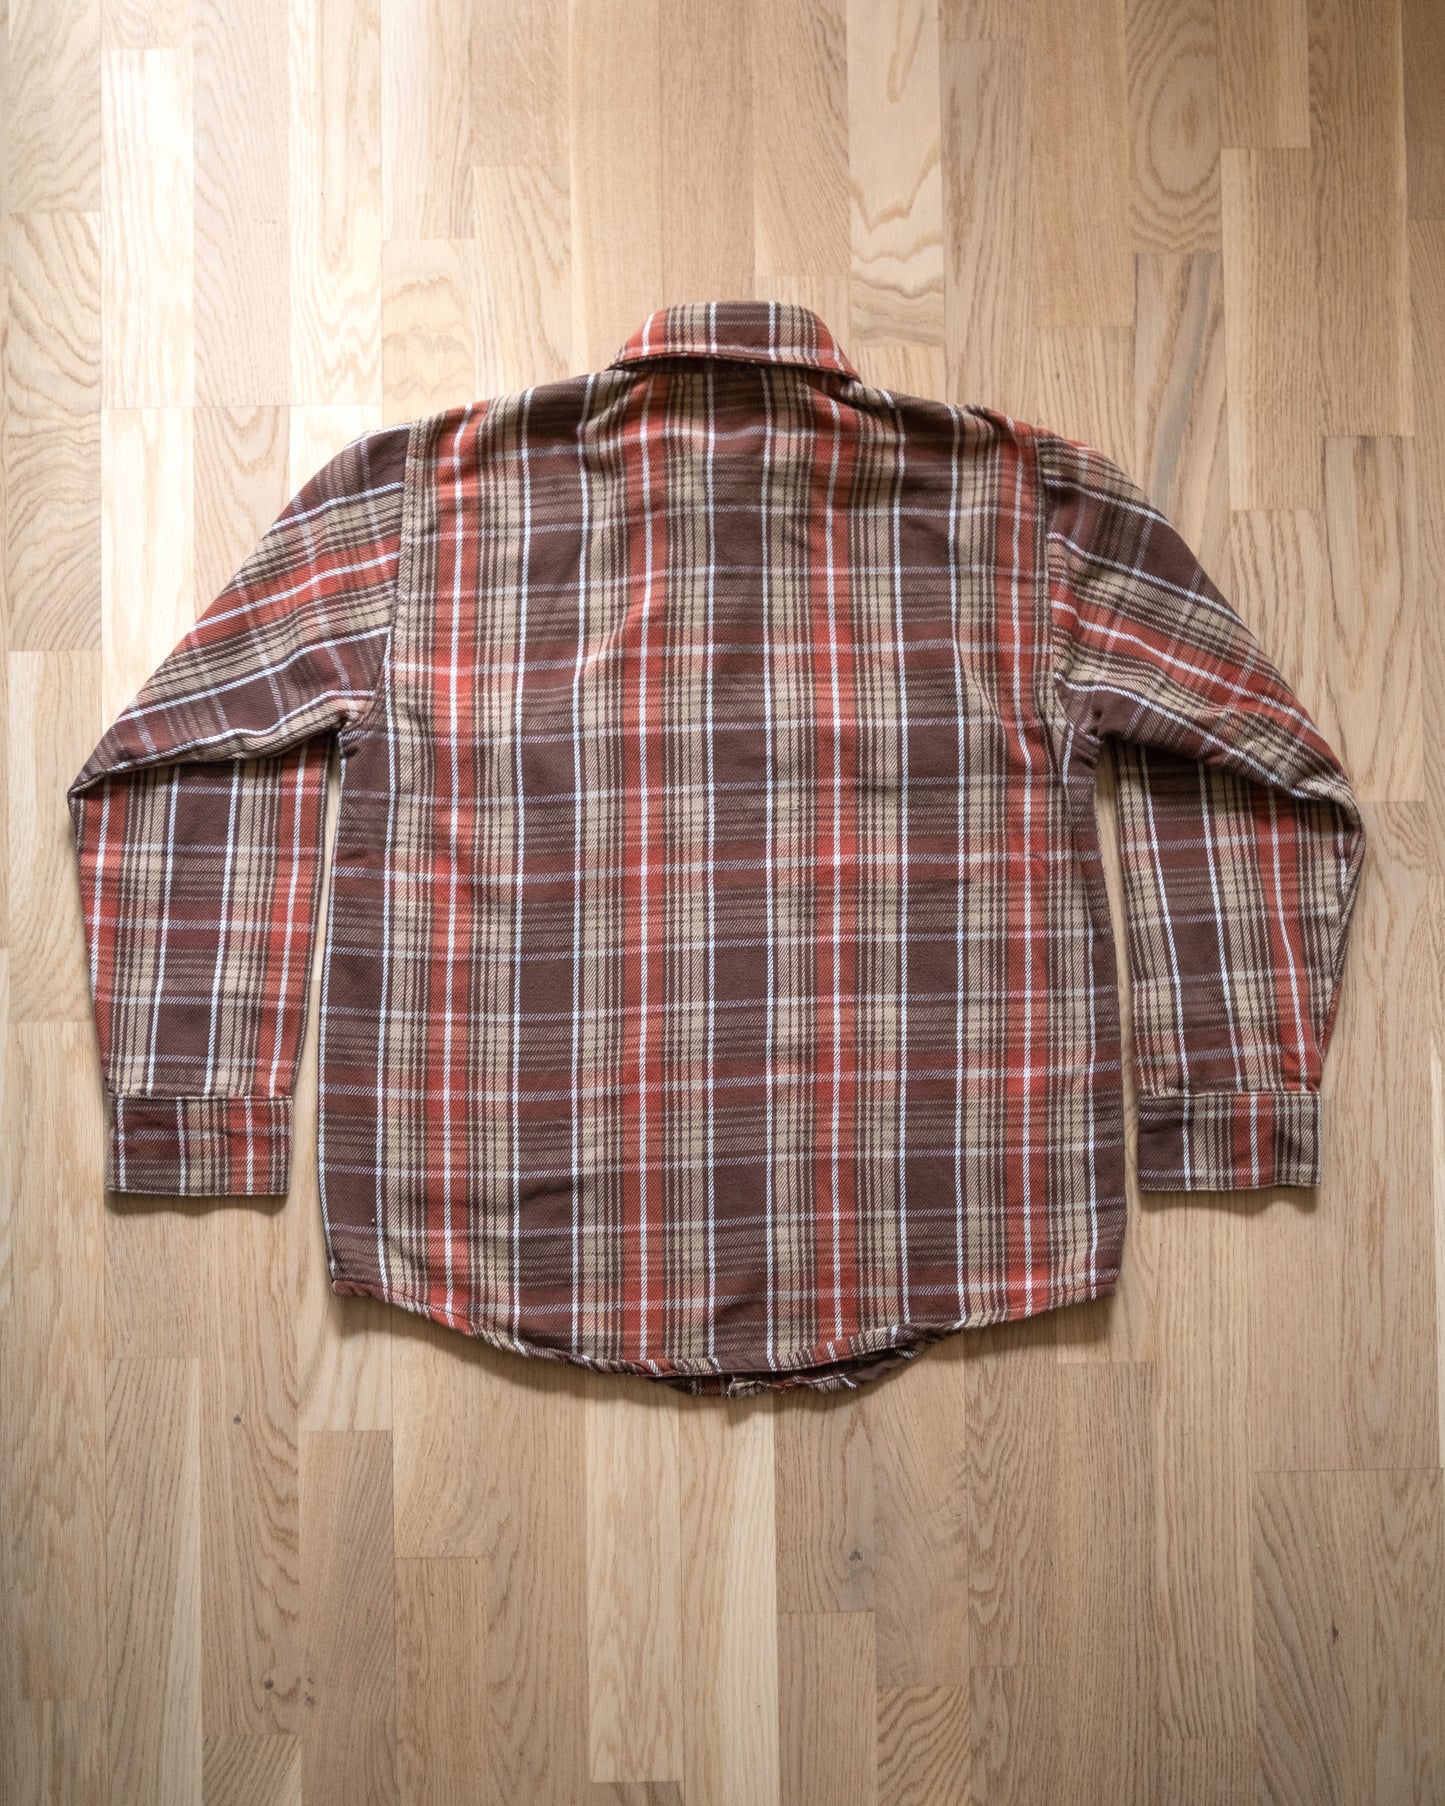 Frostproof Vintage Flannel Shirt Made in USA Size M